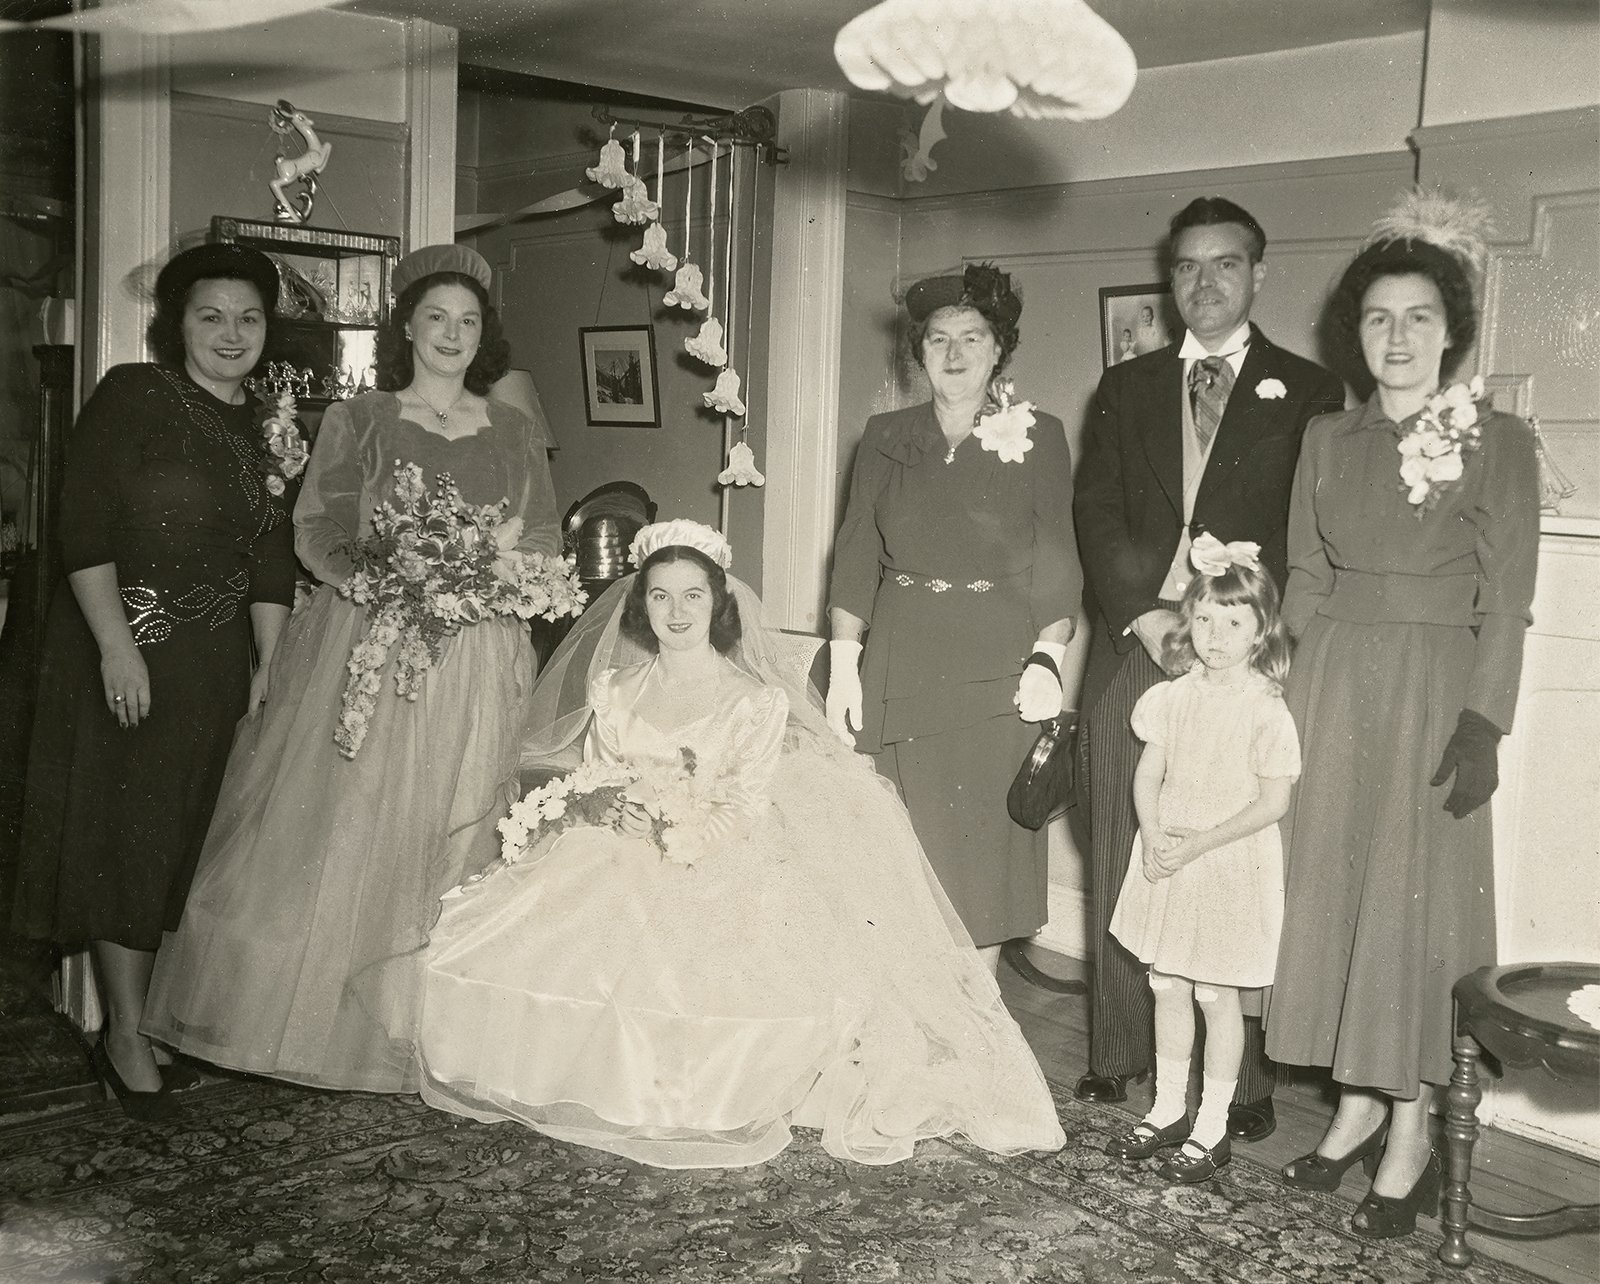 Wedding of Mildred and William, (Alice’s parents). September 18th 1948, in their apartment in Dean Street, Brooklyn.